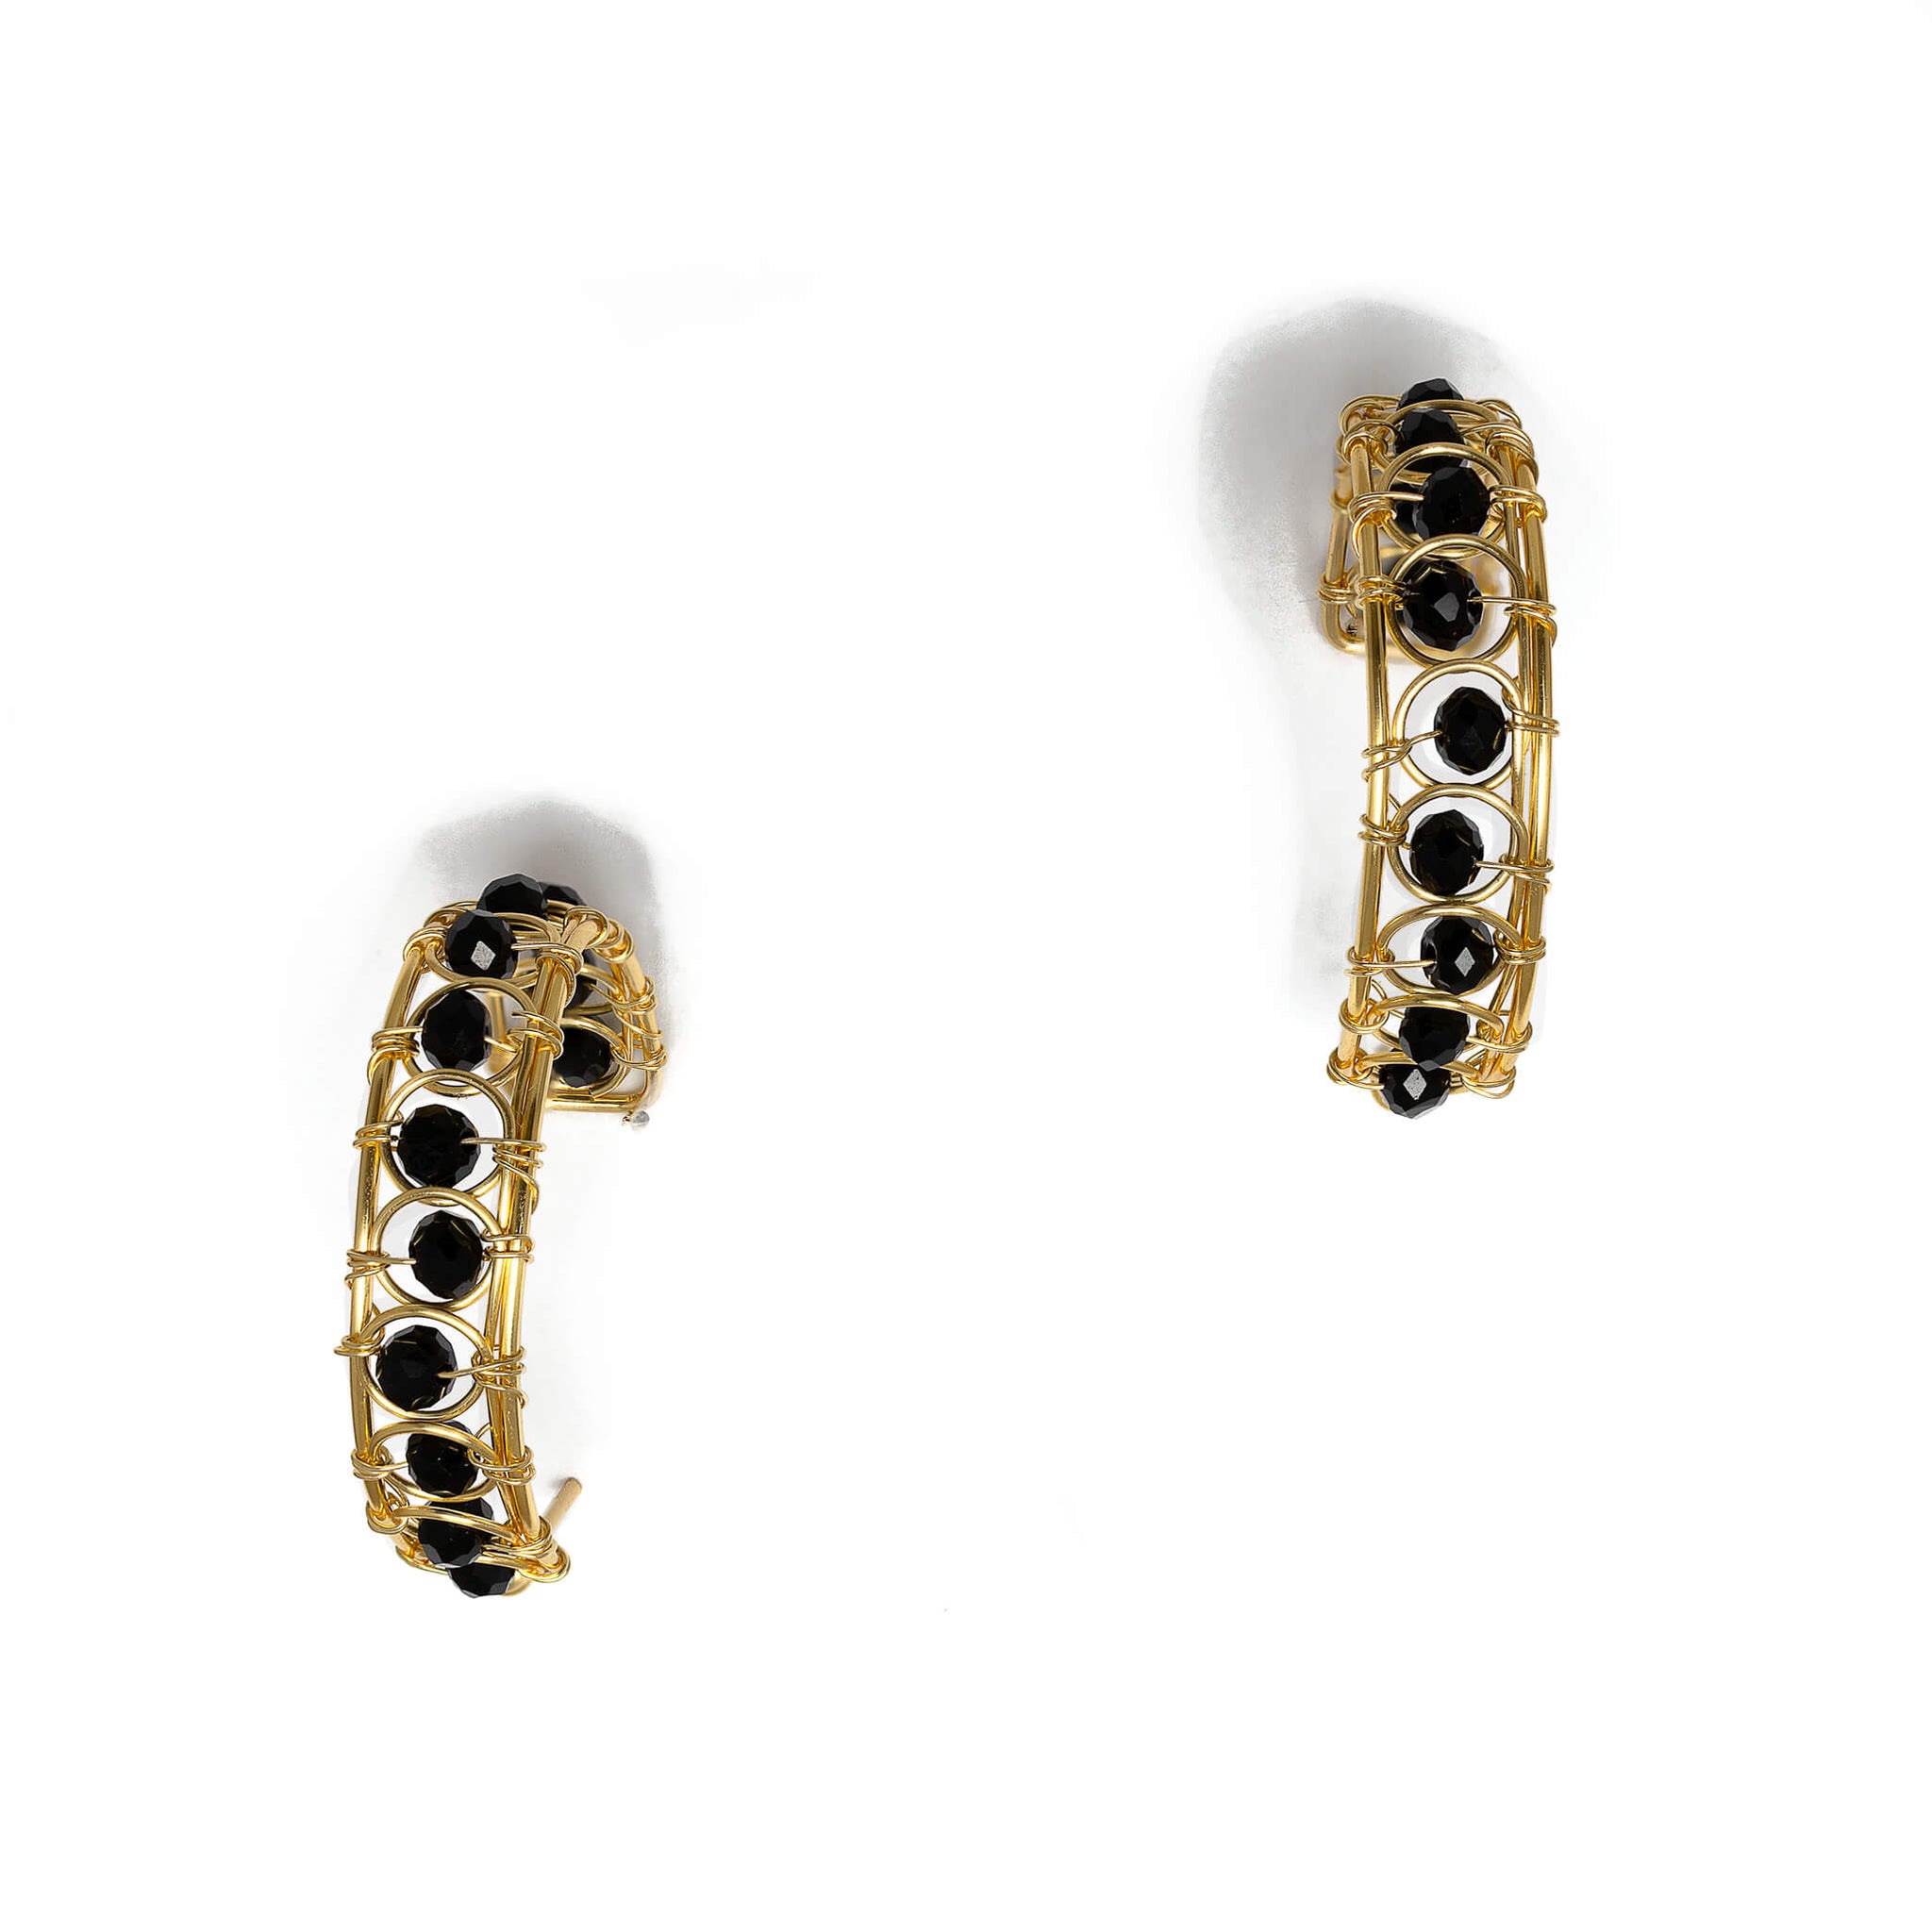 Catania Hoop Earrings are 1.25 inches long. Gold and black earrings. Handmade with gold-plated wire and faceted crystals. Beaded round Hoops. Simple Wire Wrapped Earrings